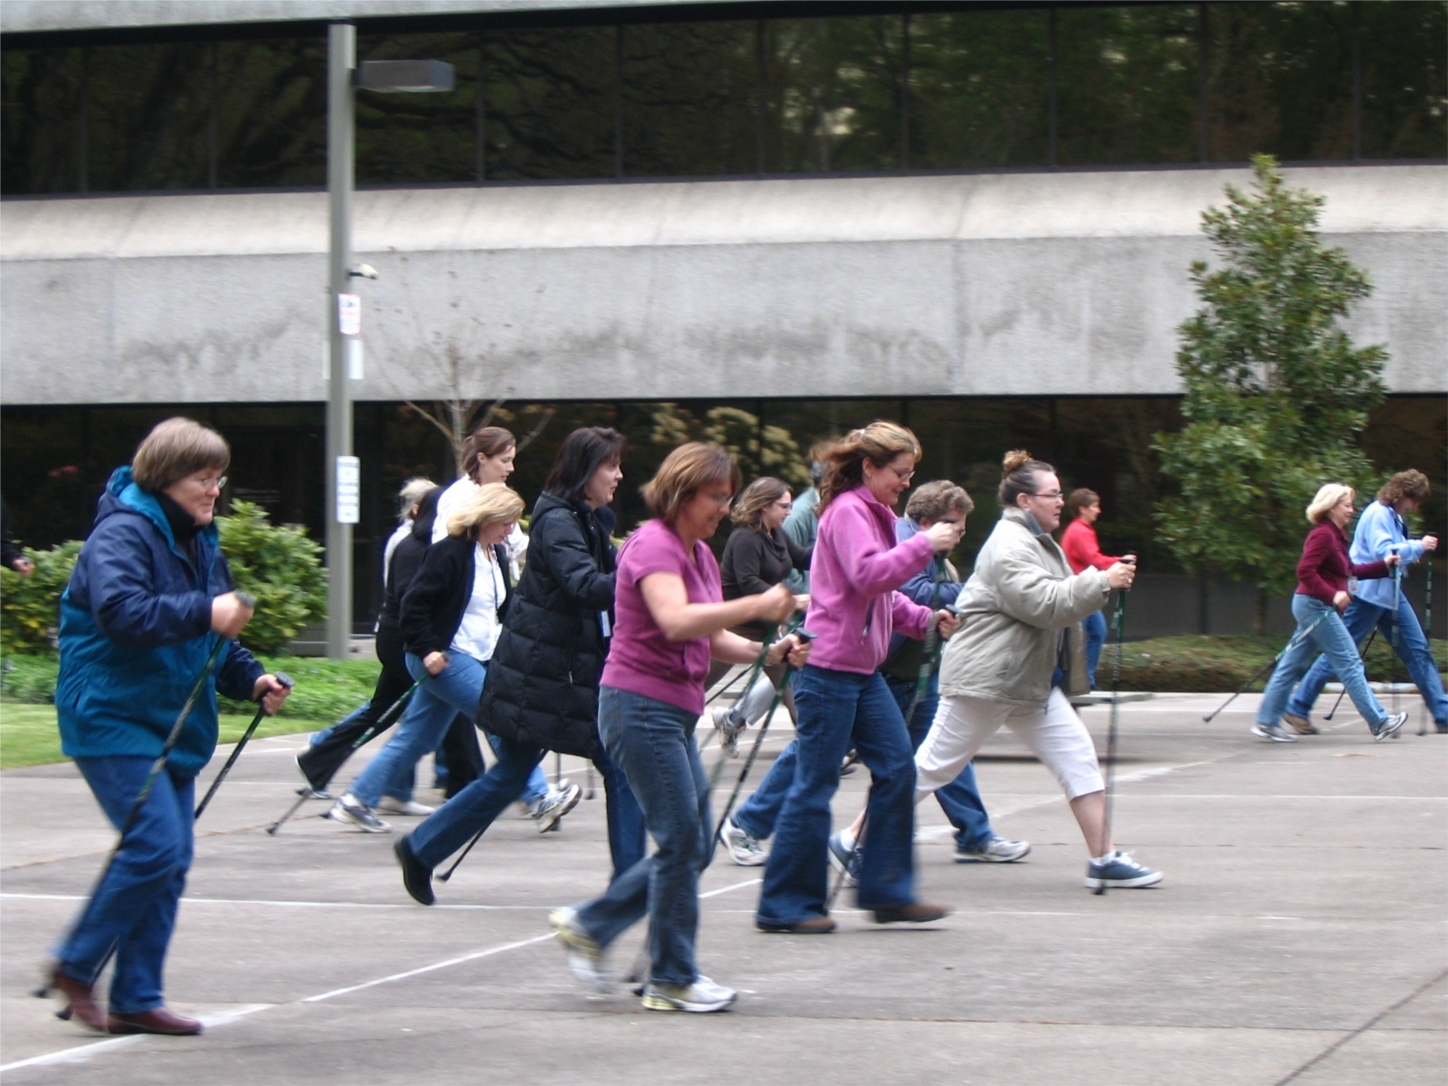 SAIF employees join a walking clinic, one of many wellness activities offered.